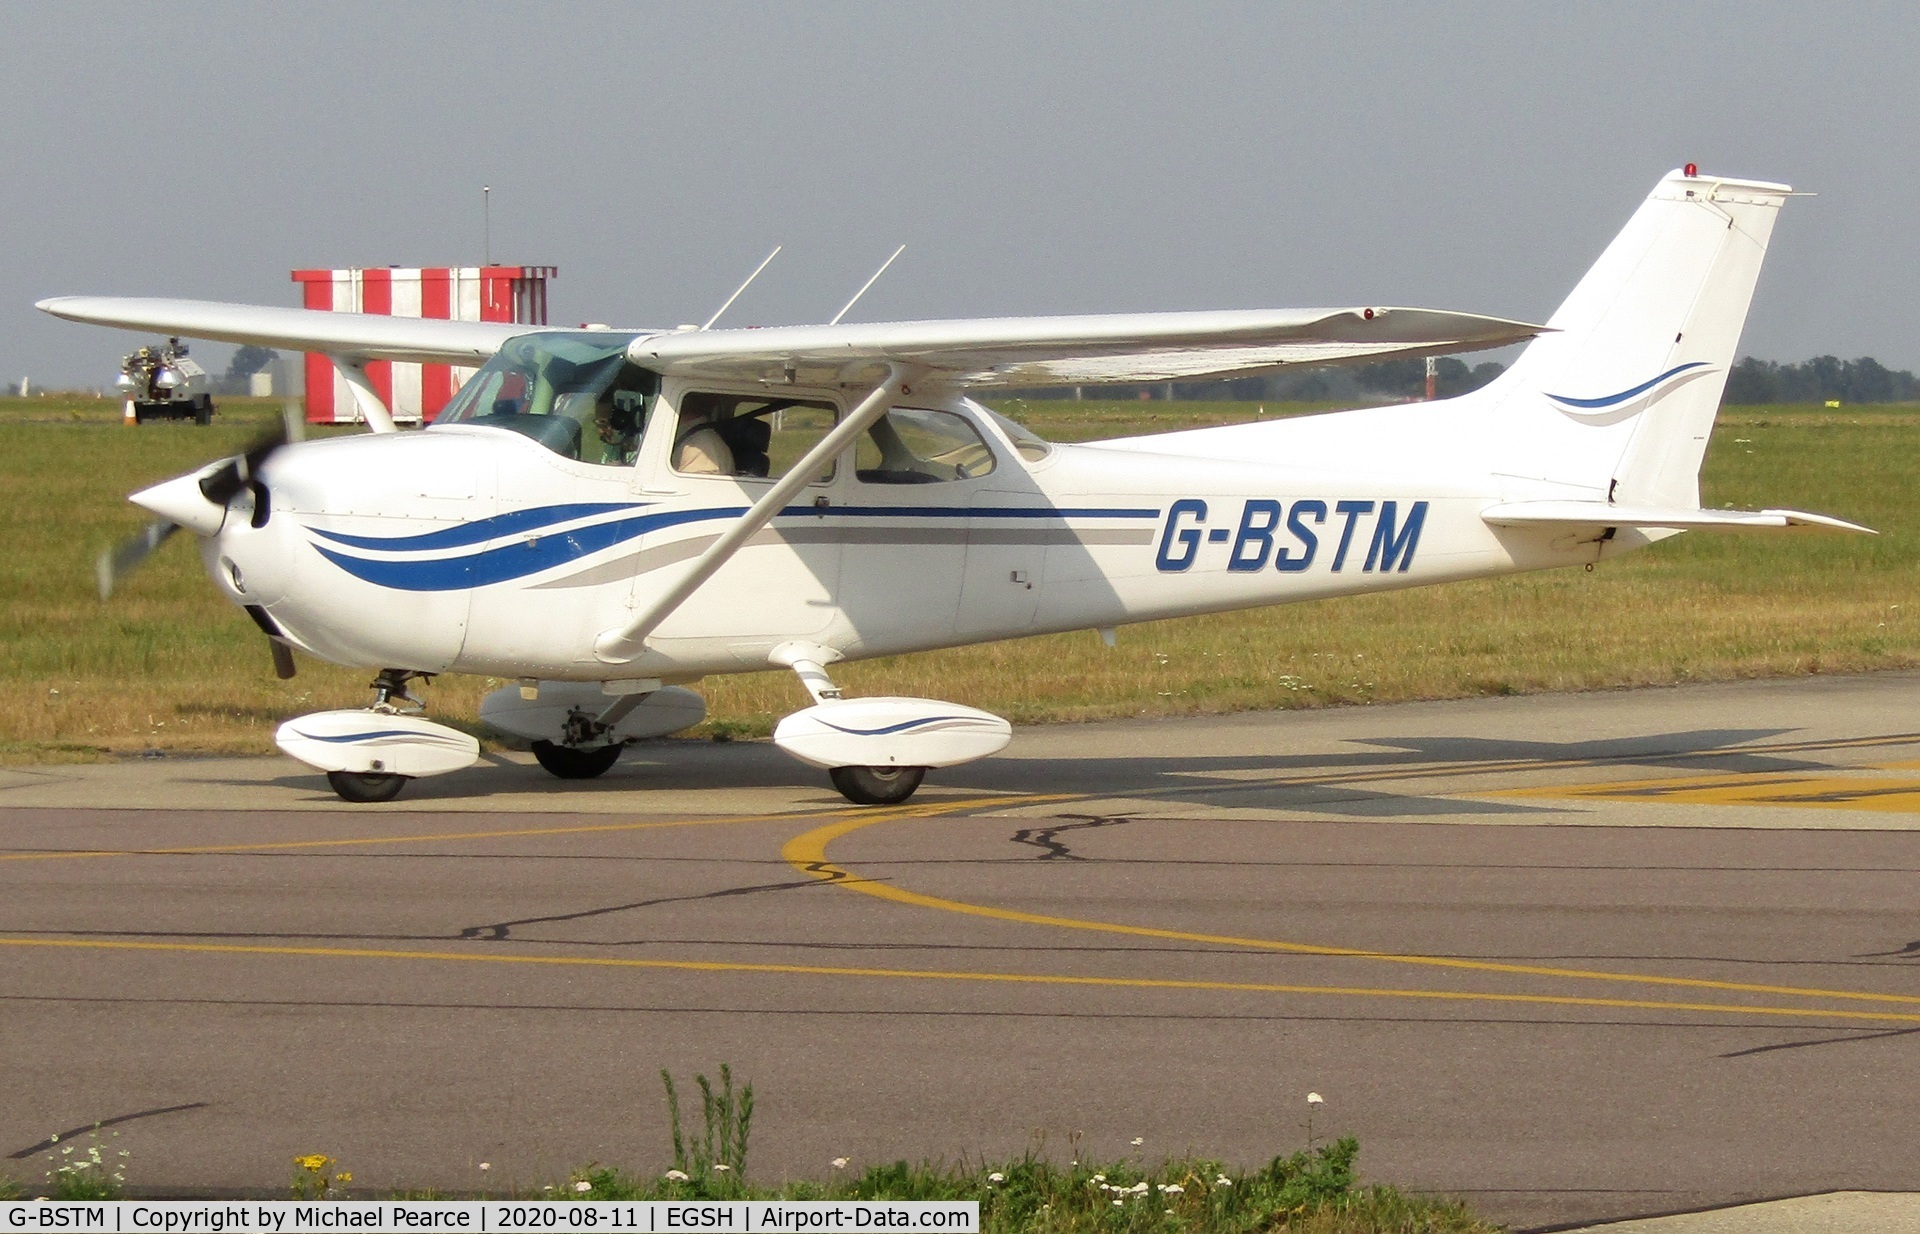 G-BSTM, 1972 Cessna 172L C/N 172-60143, Returning to Duxford (QFO) after a short visit to SaxonAir.